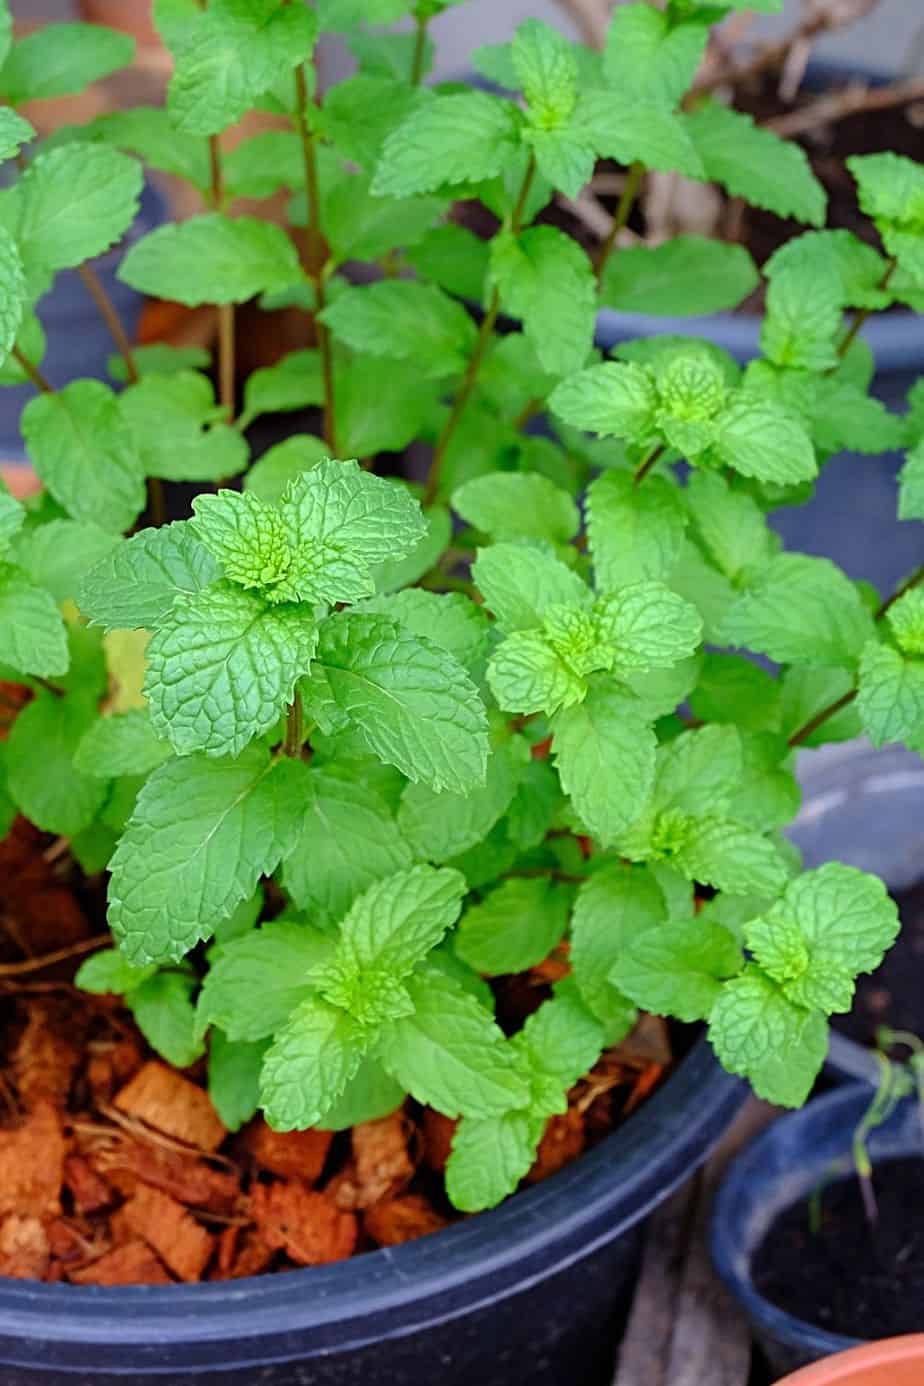 Once your mint contracts the mint rust, repot the healthy part of the Mint plant in fresh soil, increasing its airflow